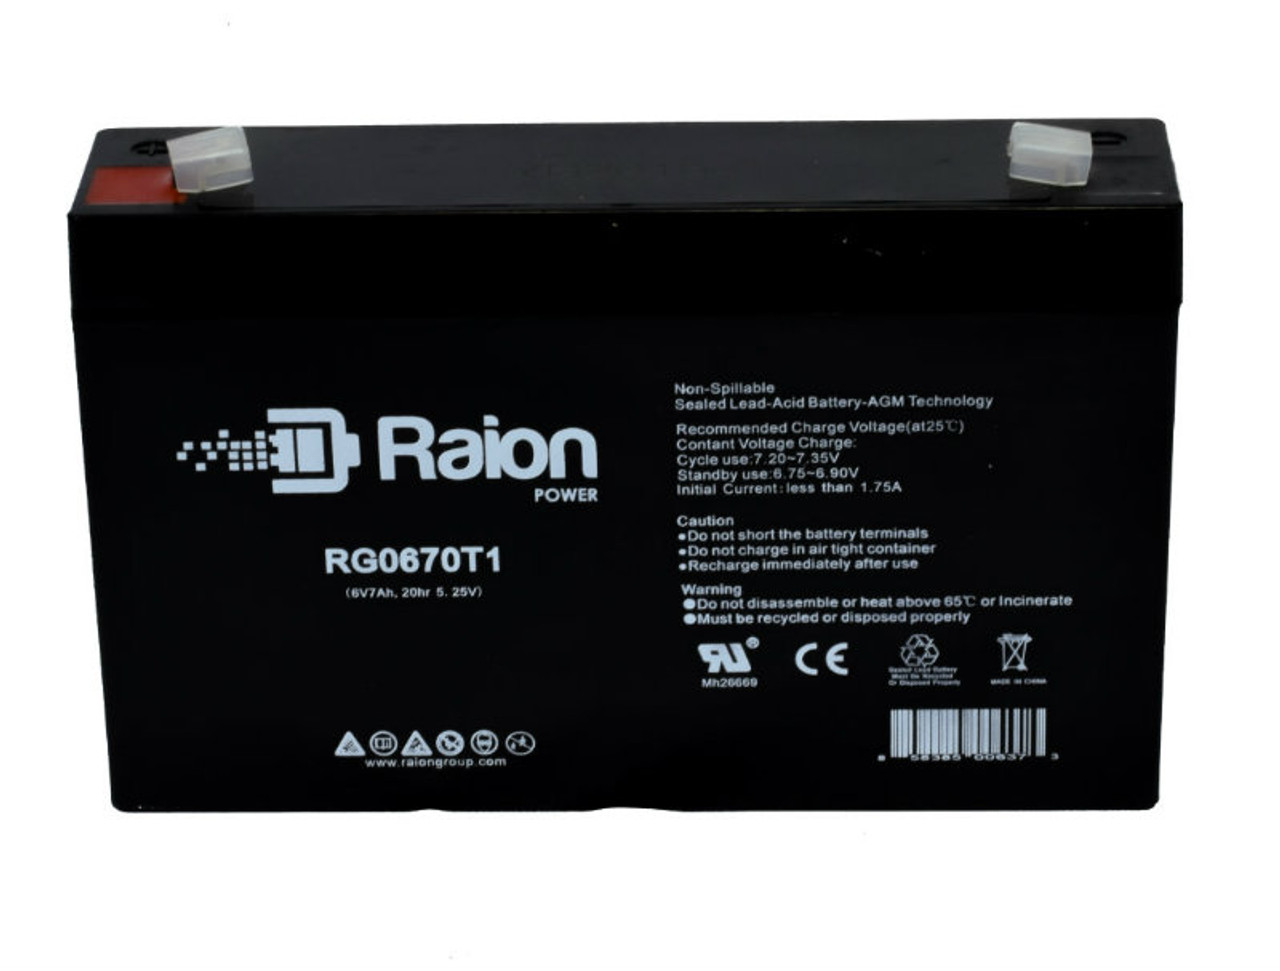 Raion Power RG0670T1 Replacement Battery Cartridge for POWERGOR SB6-7